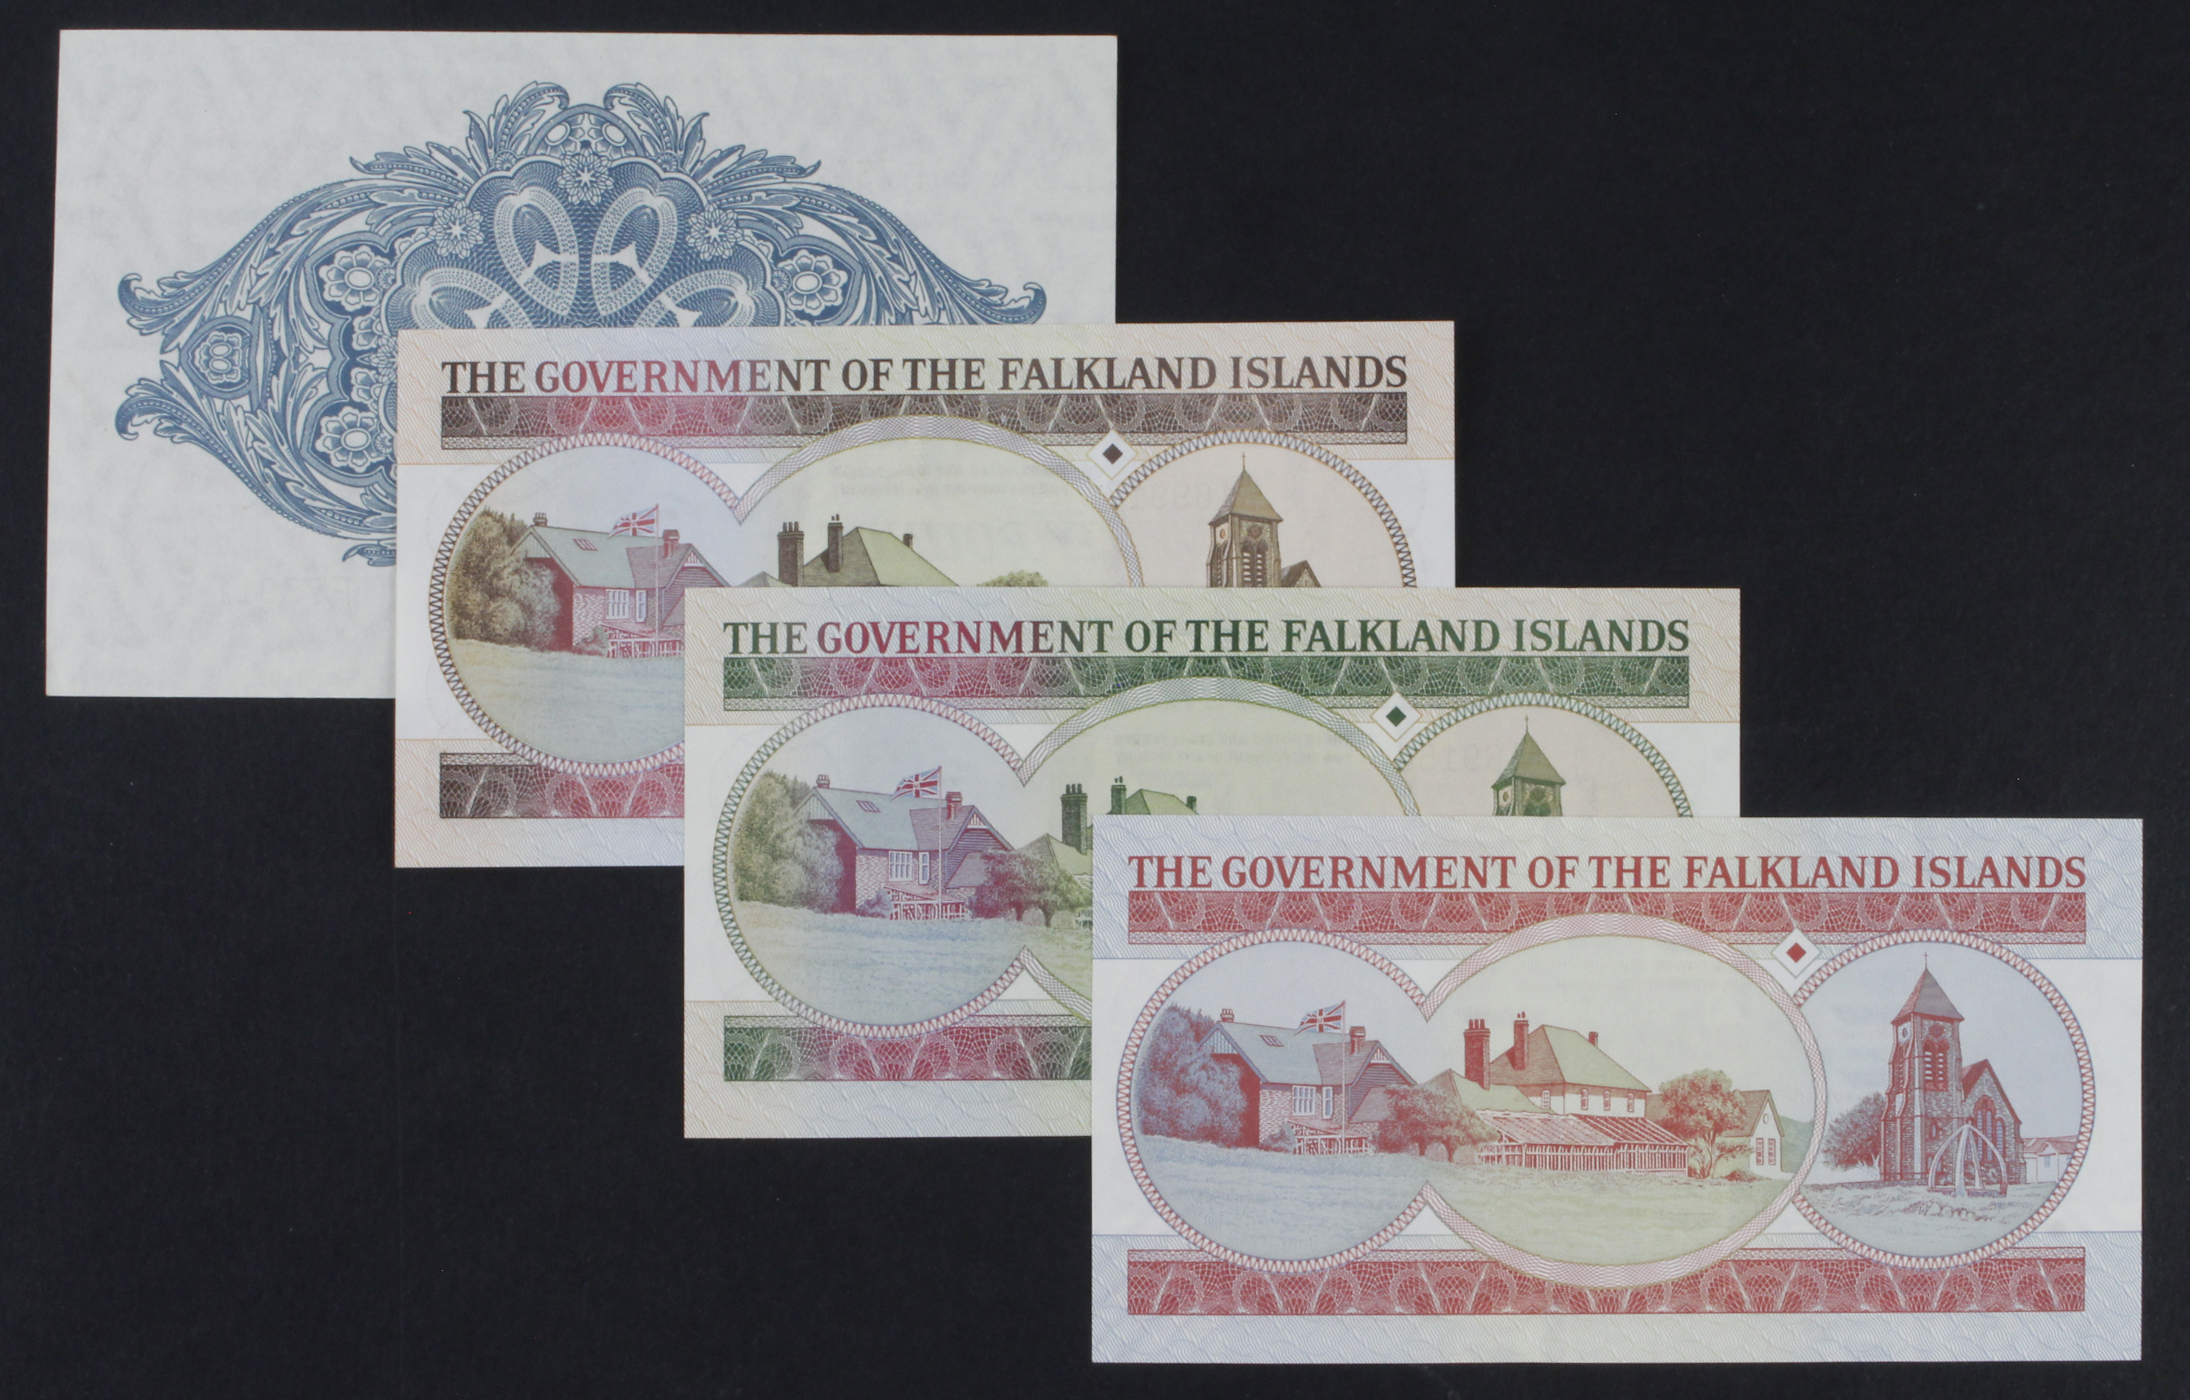 Falkland Islands (4), 1 Pound dated 1st January 1982, serial F73911 (TBB B213d, Pick8d), 20 Pounds - Image 2 of 2